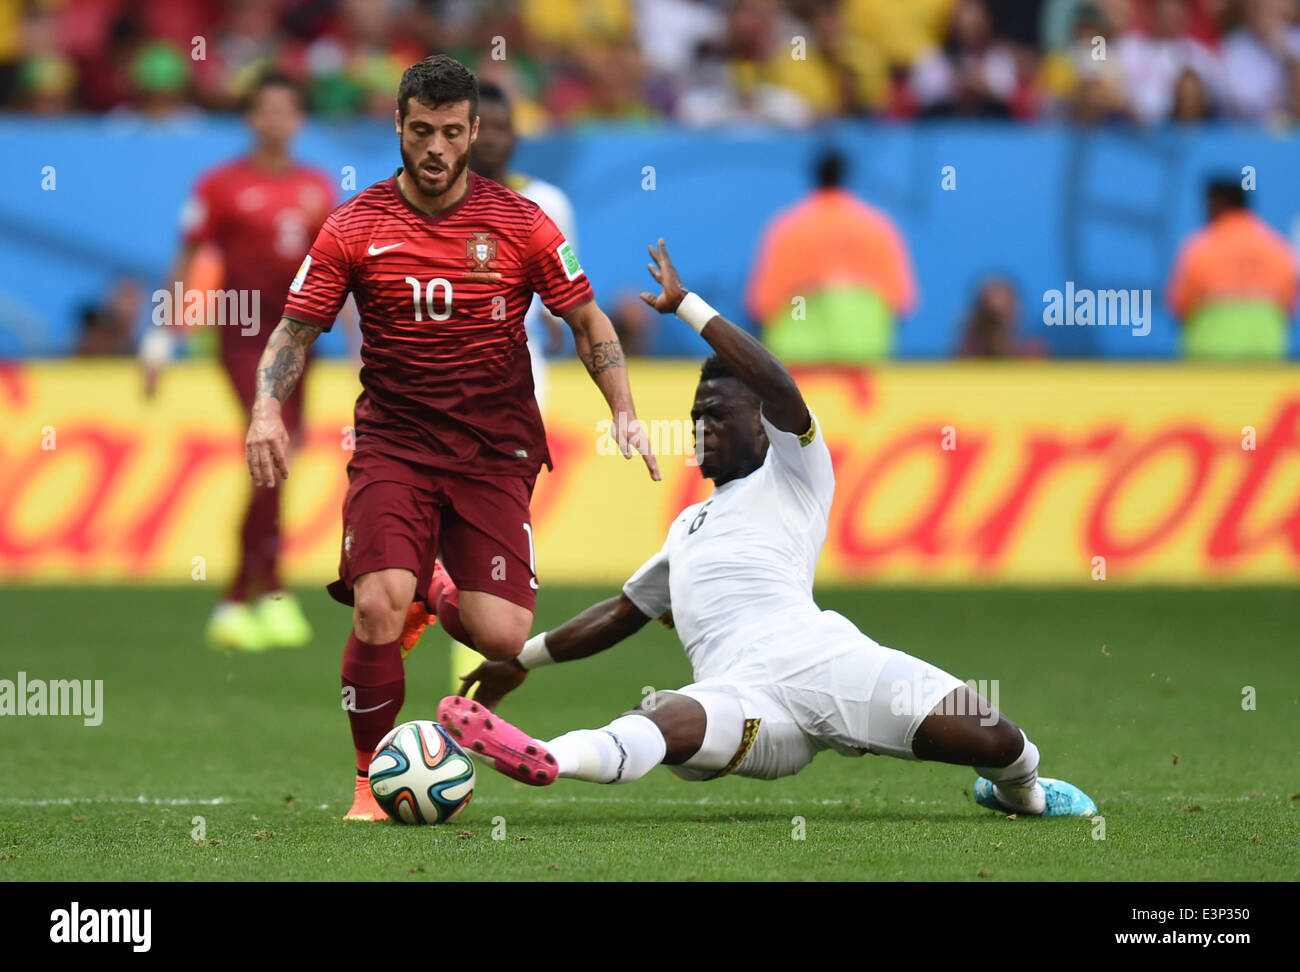 Brasilia, Brazil. 26th June, 2014. Acquah Afriyie (R) of Ghana in action against Vieirinha of Portugal during the FIFA World Cup 2014 group G preliminary round match between Portugal and Ghana at the Estadio National Stadium in Brasilia, Brazil, on 26 June 2014. Photo: Marius Becker/dpa/Alamy Live News  Stock Photo